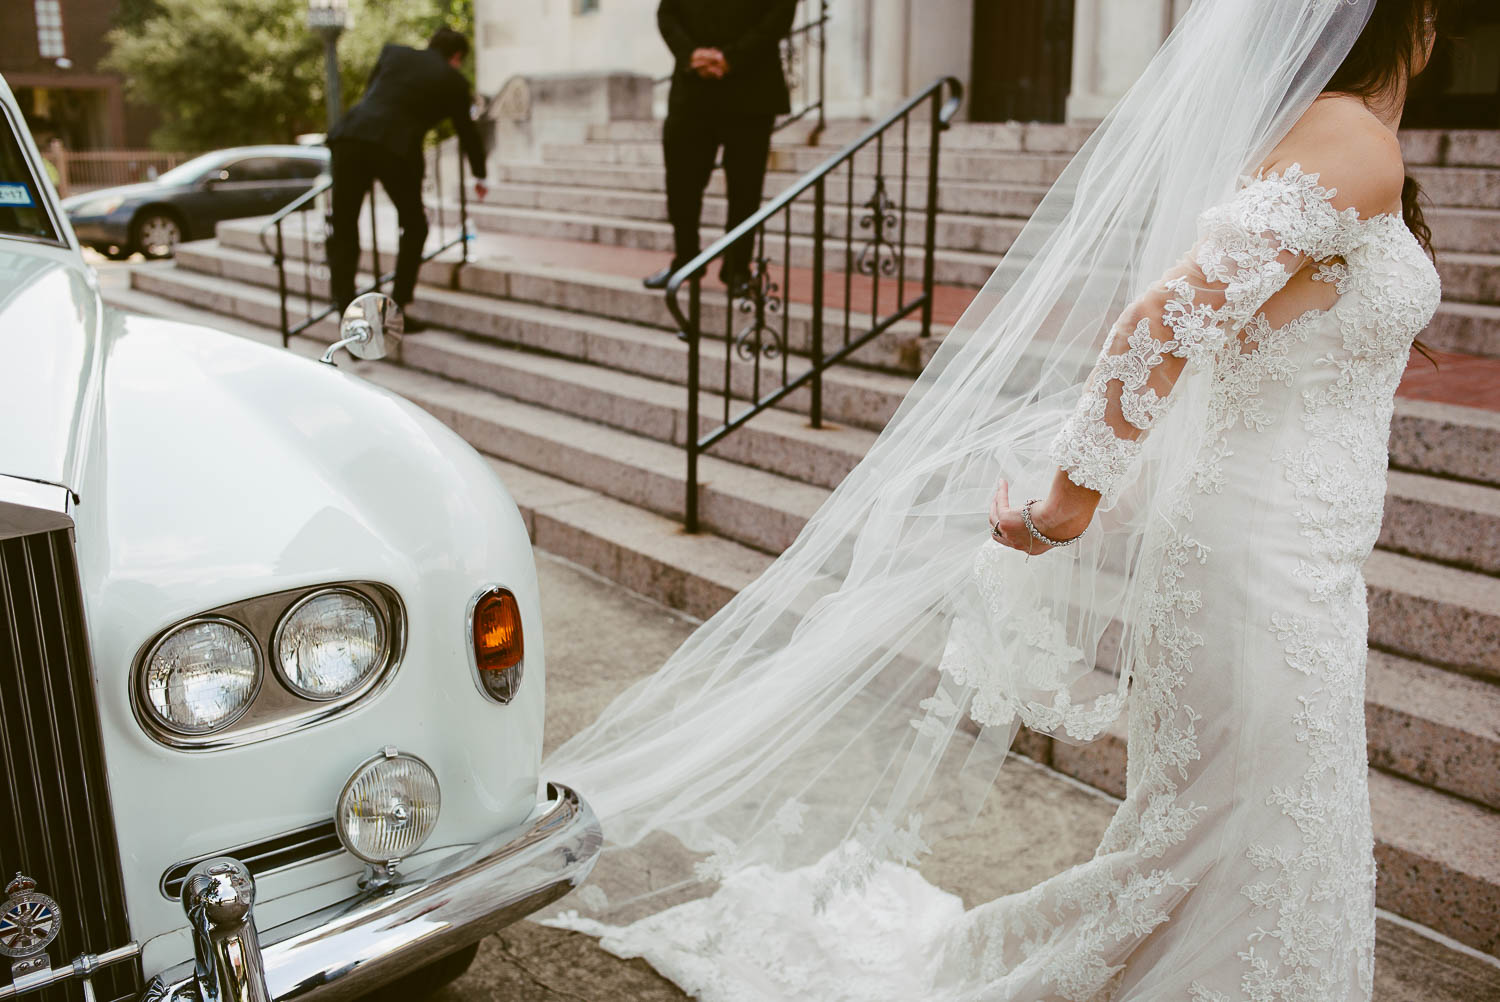 A triangle shape with brides veil and old antique car at wedding ceremony la-cantera-resort-wedding-photographer-philip-thomas